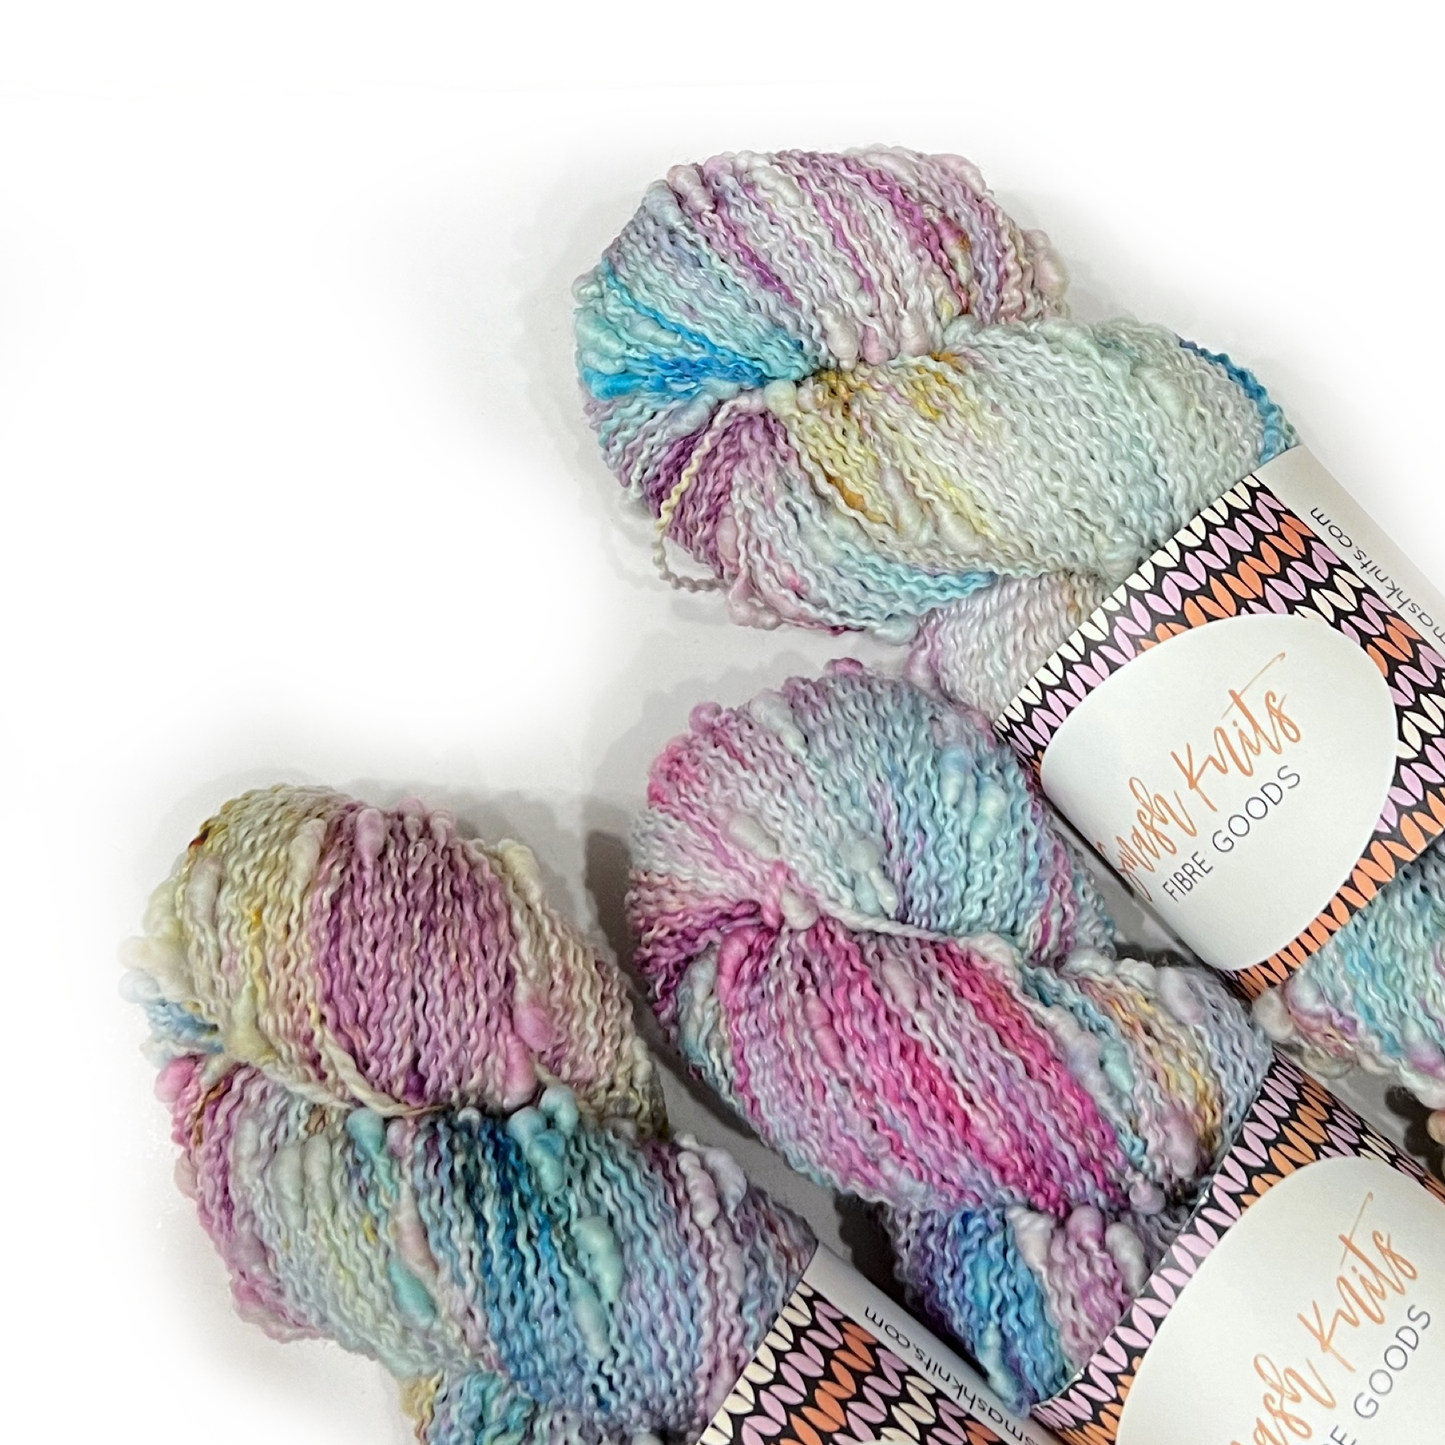 SEA STONES - Purple Pink Turquoise Cream Toffee Speckled Tonal SUS or COCOON